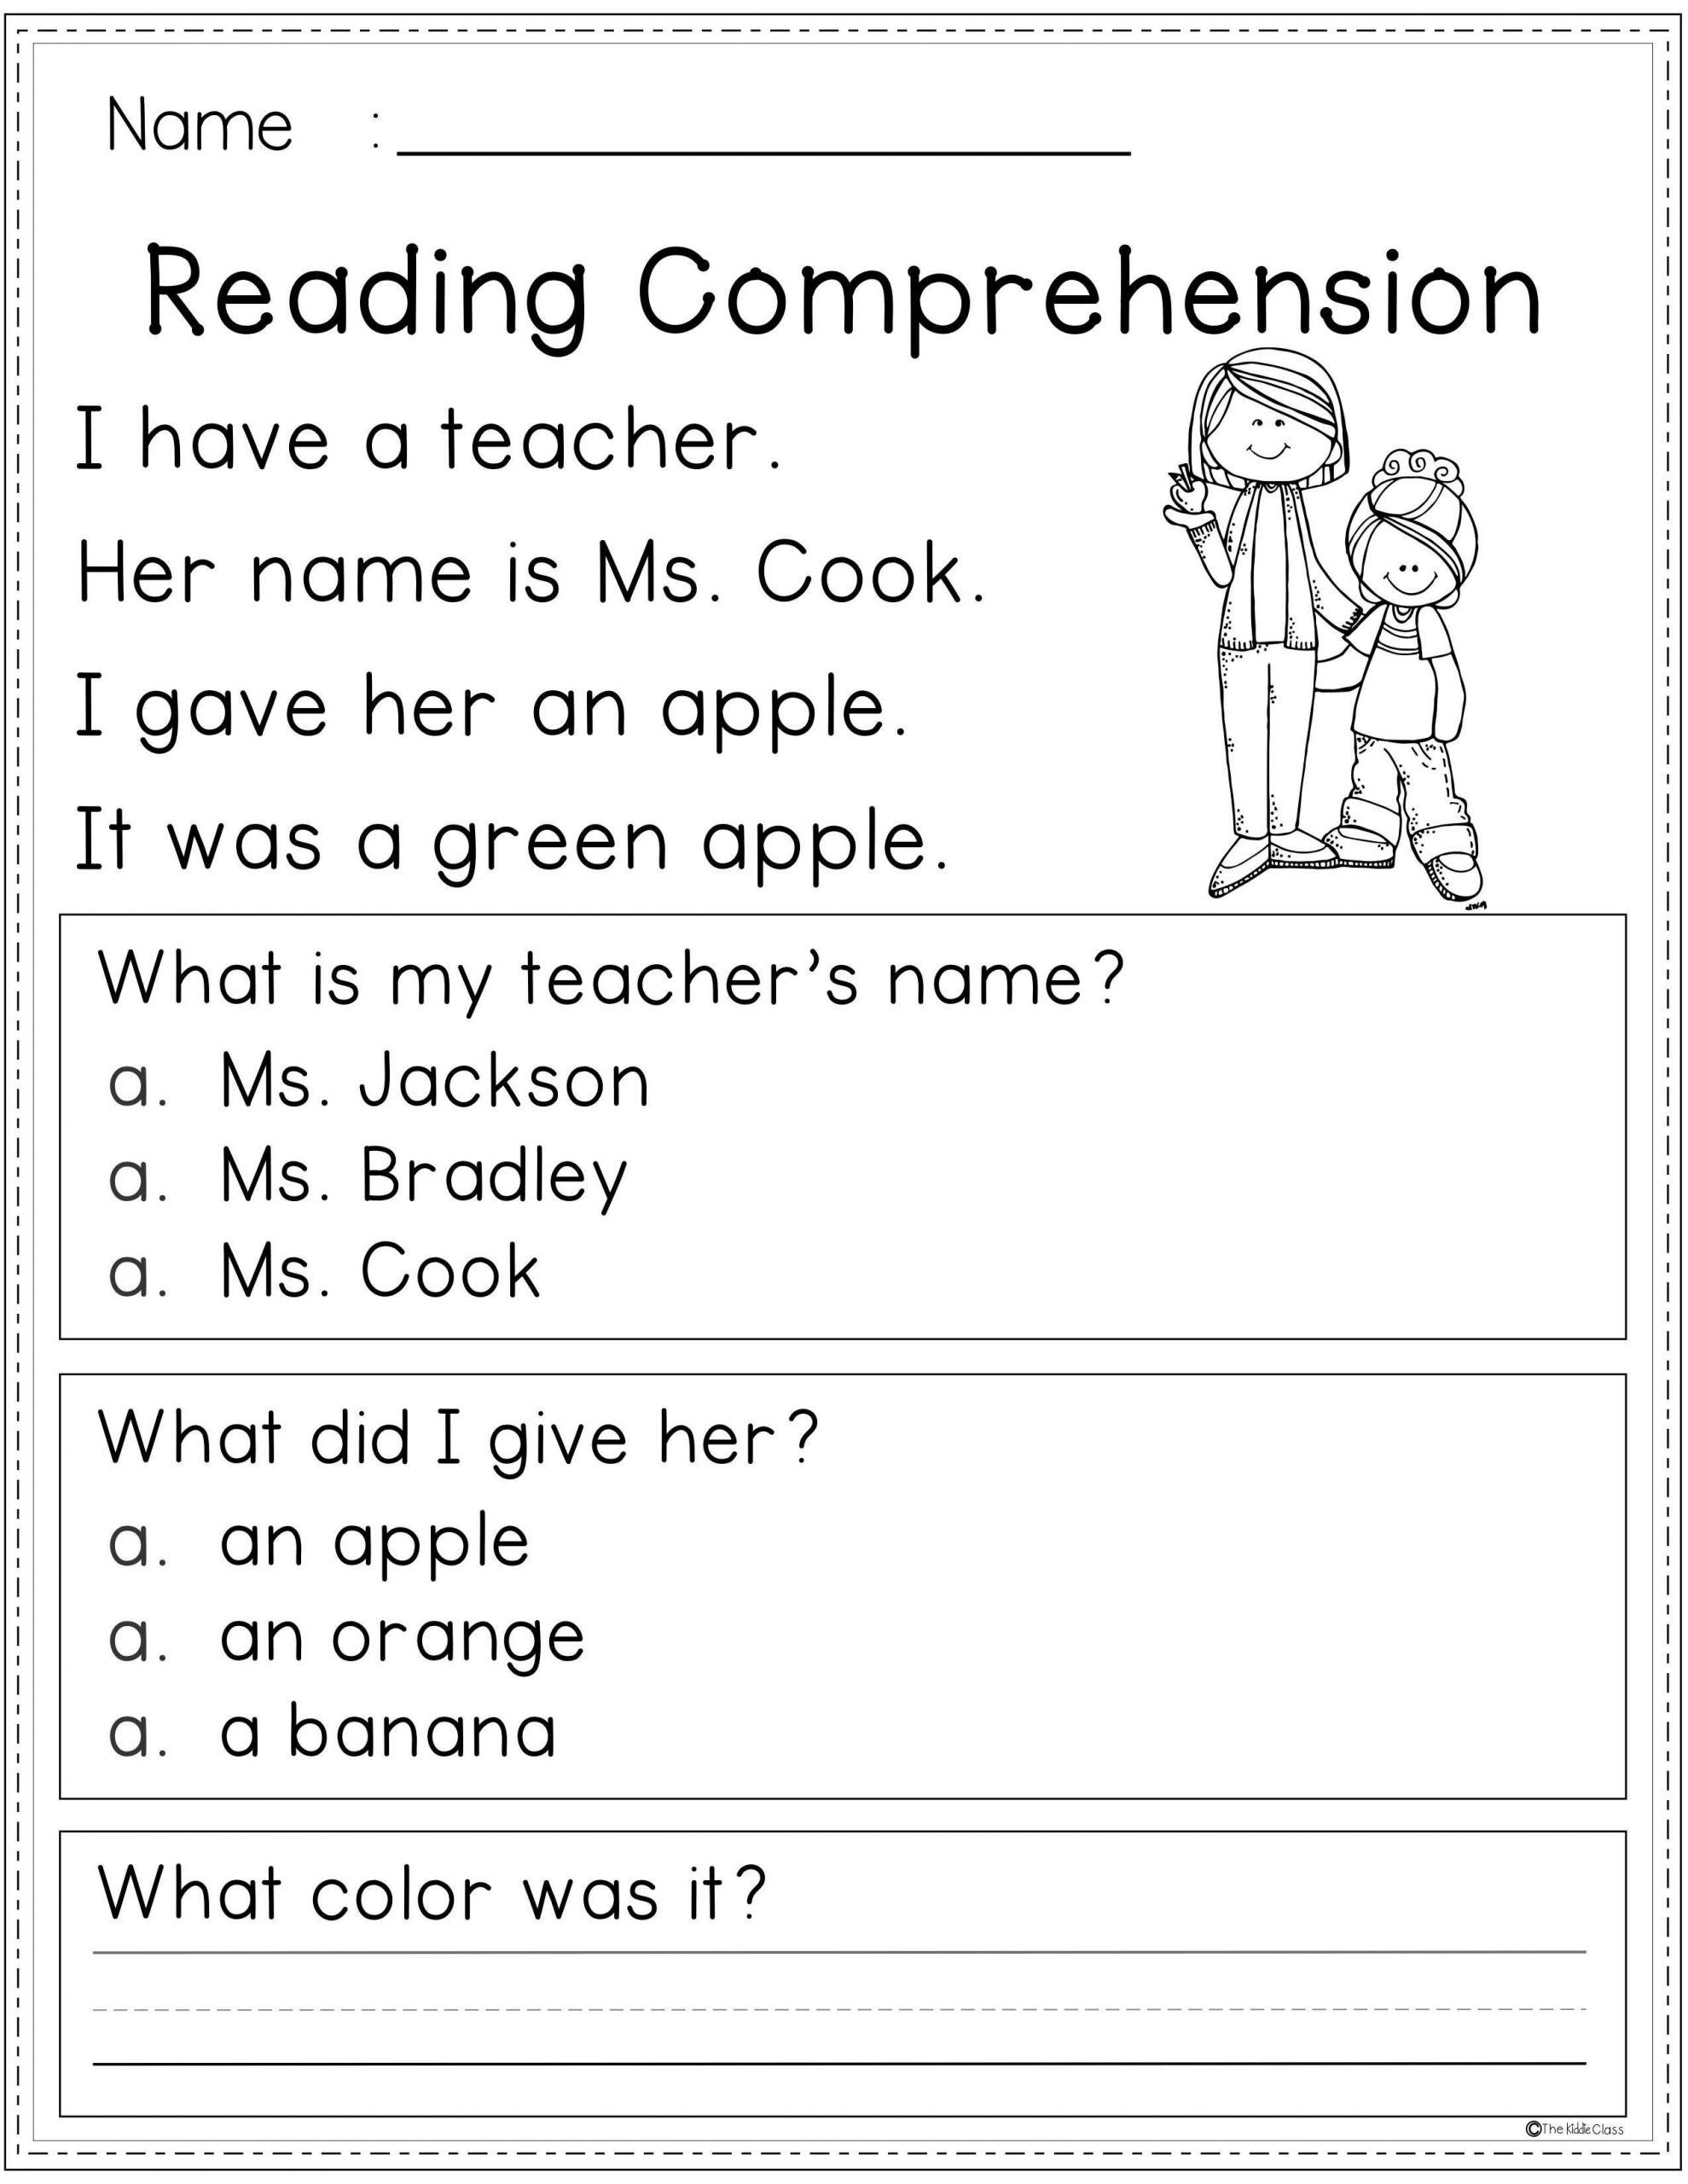 2nd grade reading comprehension worksheets pdf with answers